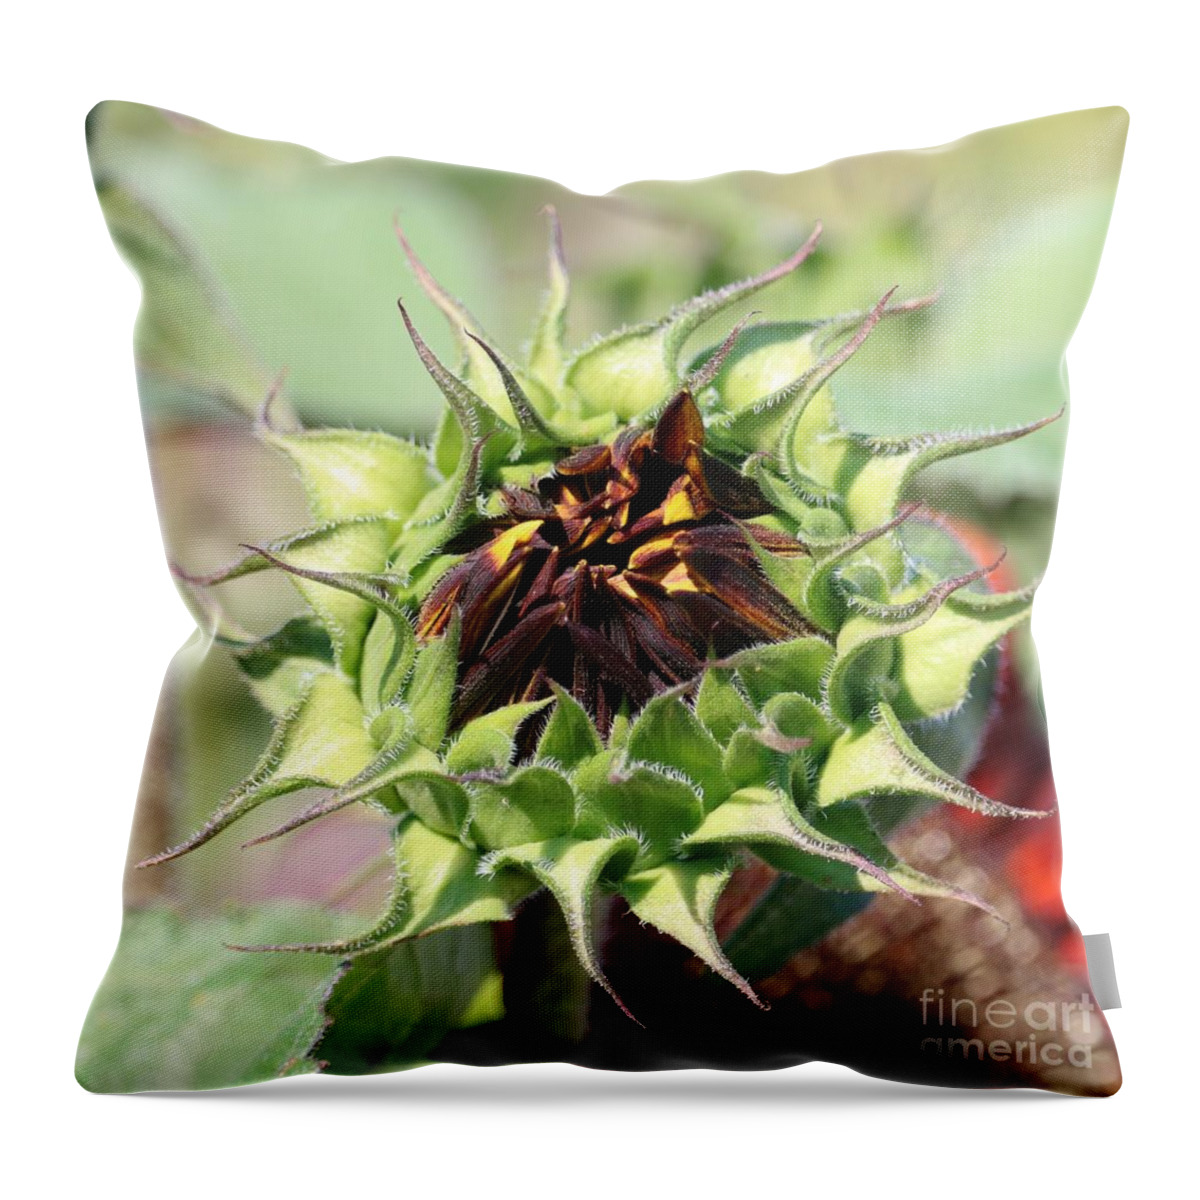 Sunflower Throw Pillow featuring the photograph Unfolding Orange Sunflower Square by Carol Groenen